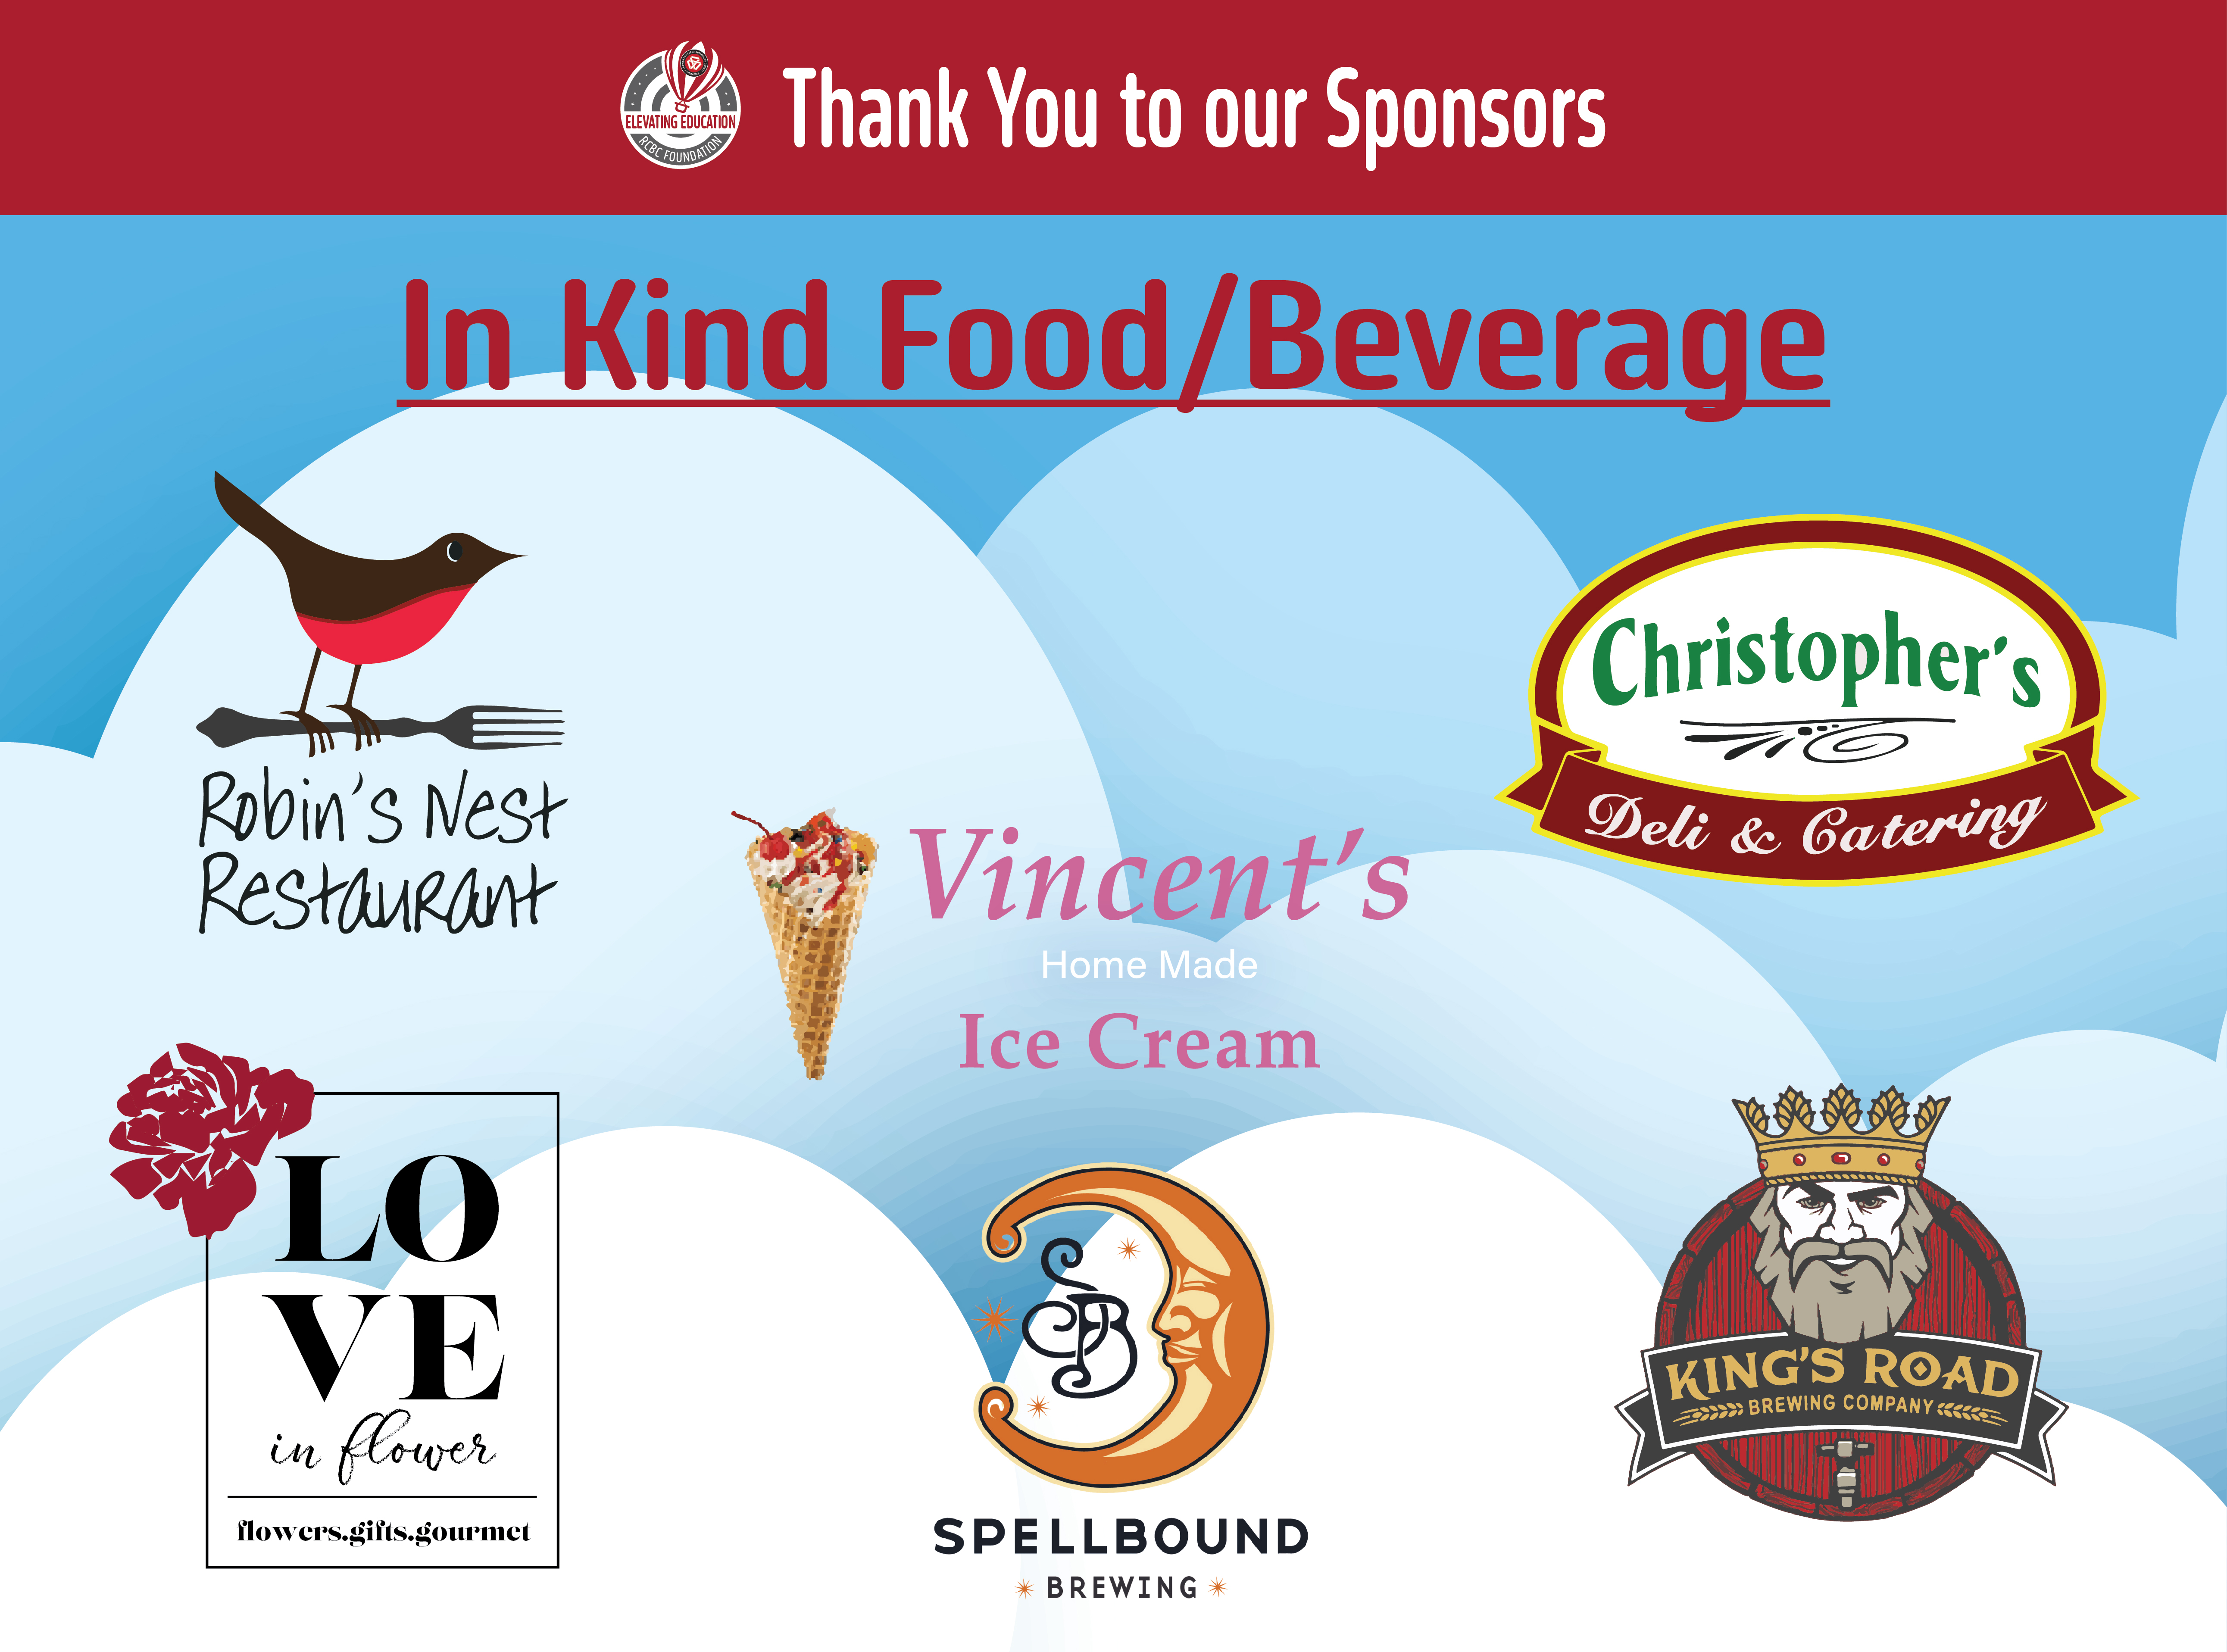 In Kind Food sponosorship providers kings road brewing, spellbound brewing, robin's nest restaurant, vincent's ice cream